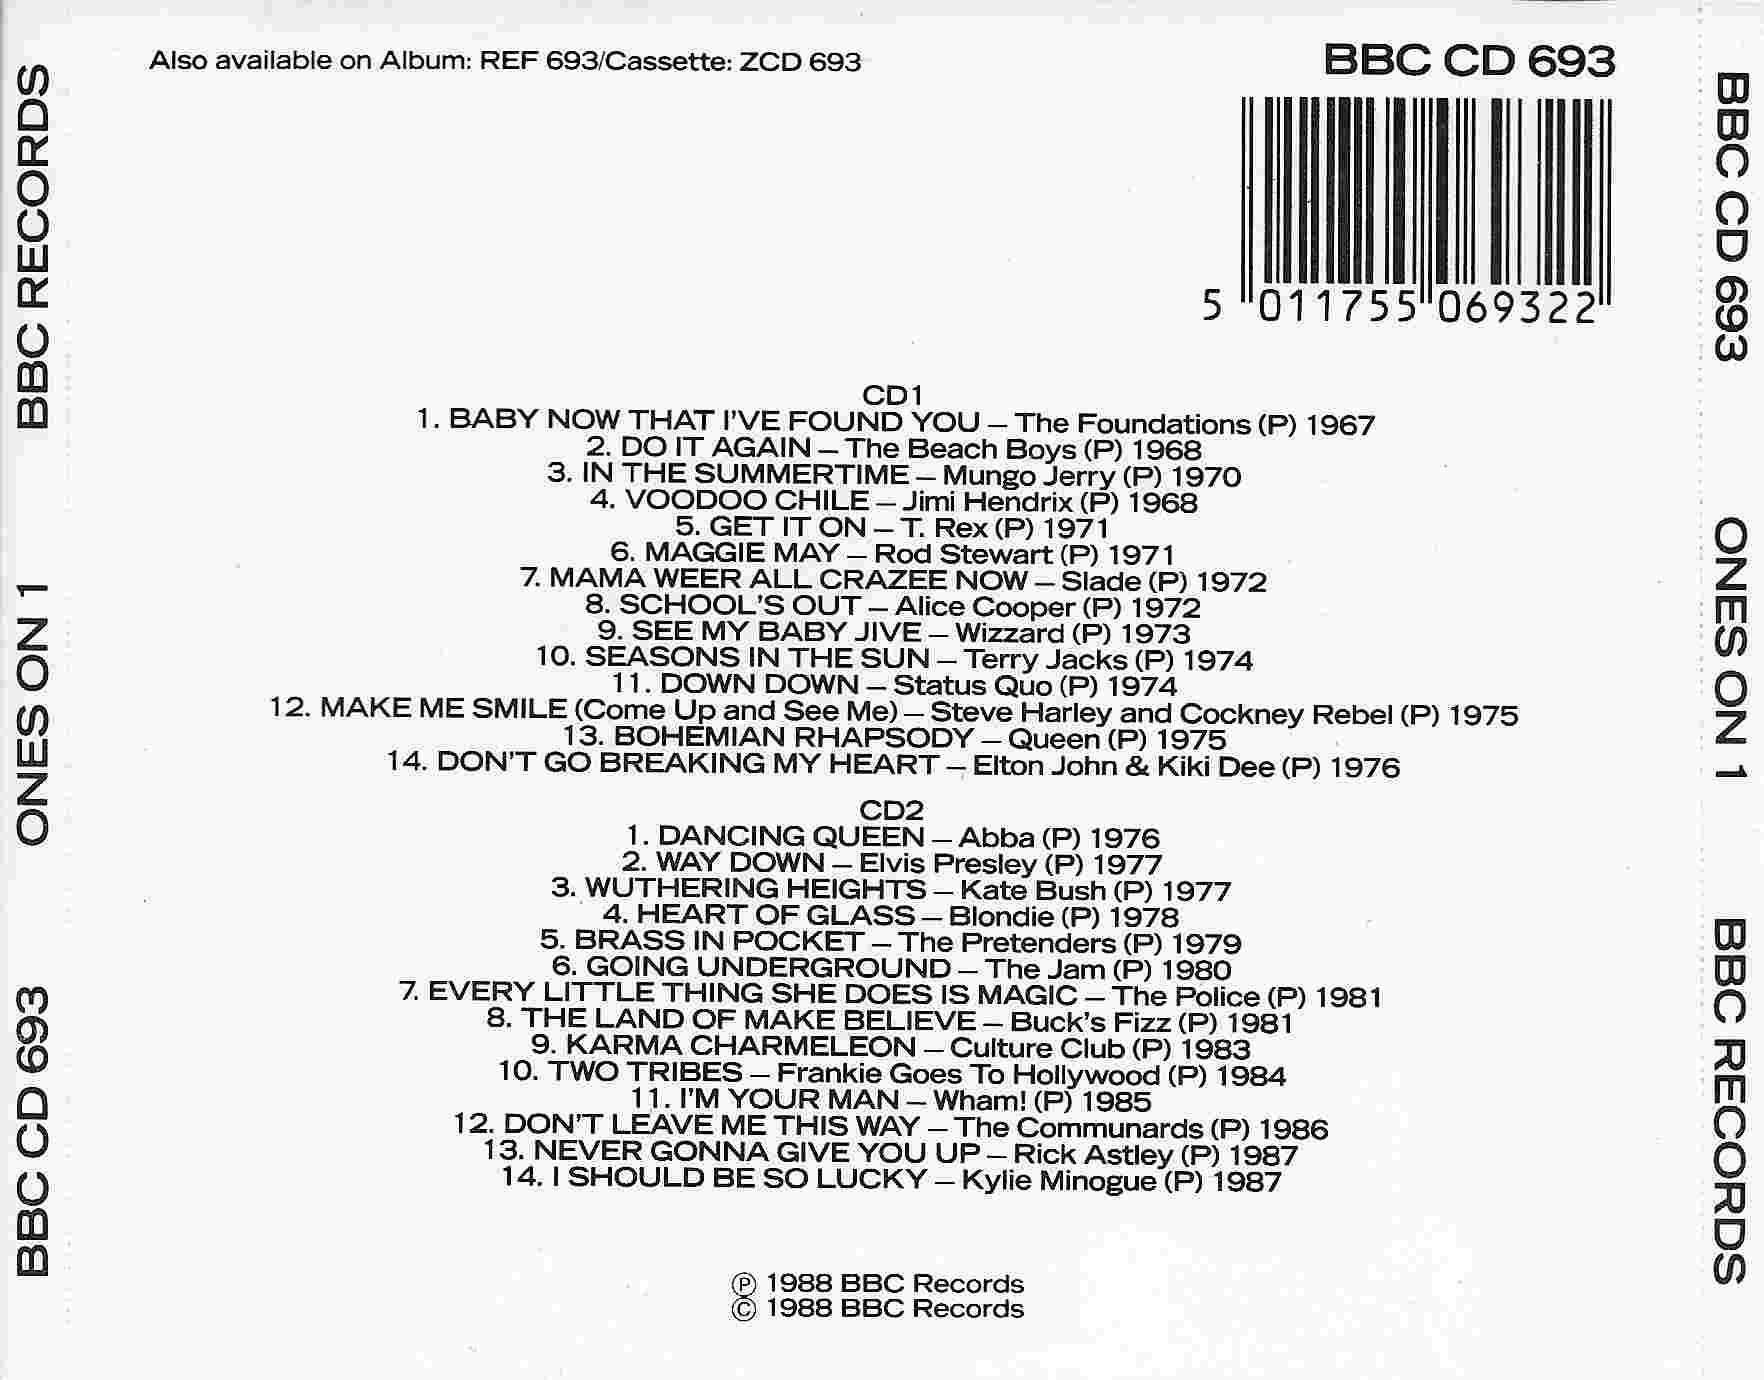 Back cover of BBCCD693